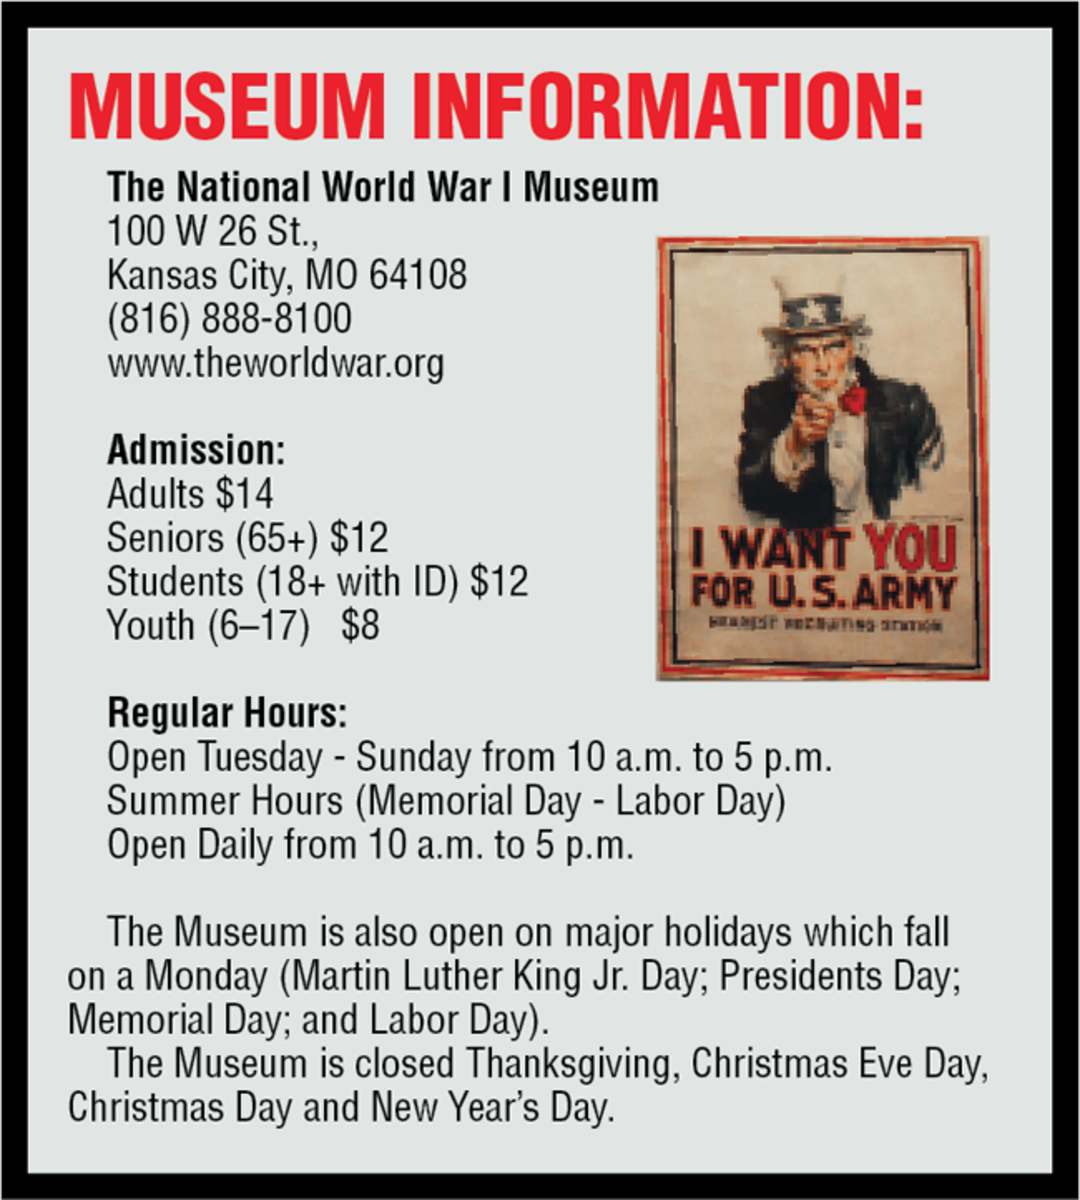 Museum details and hours